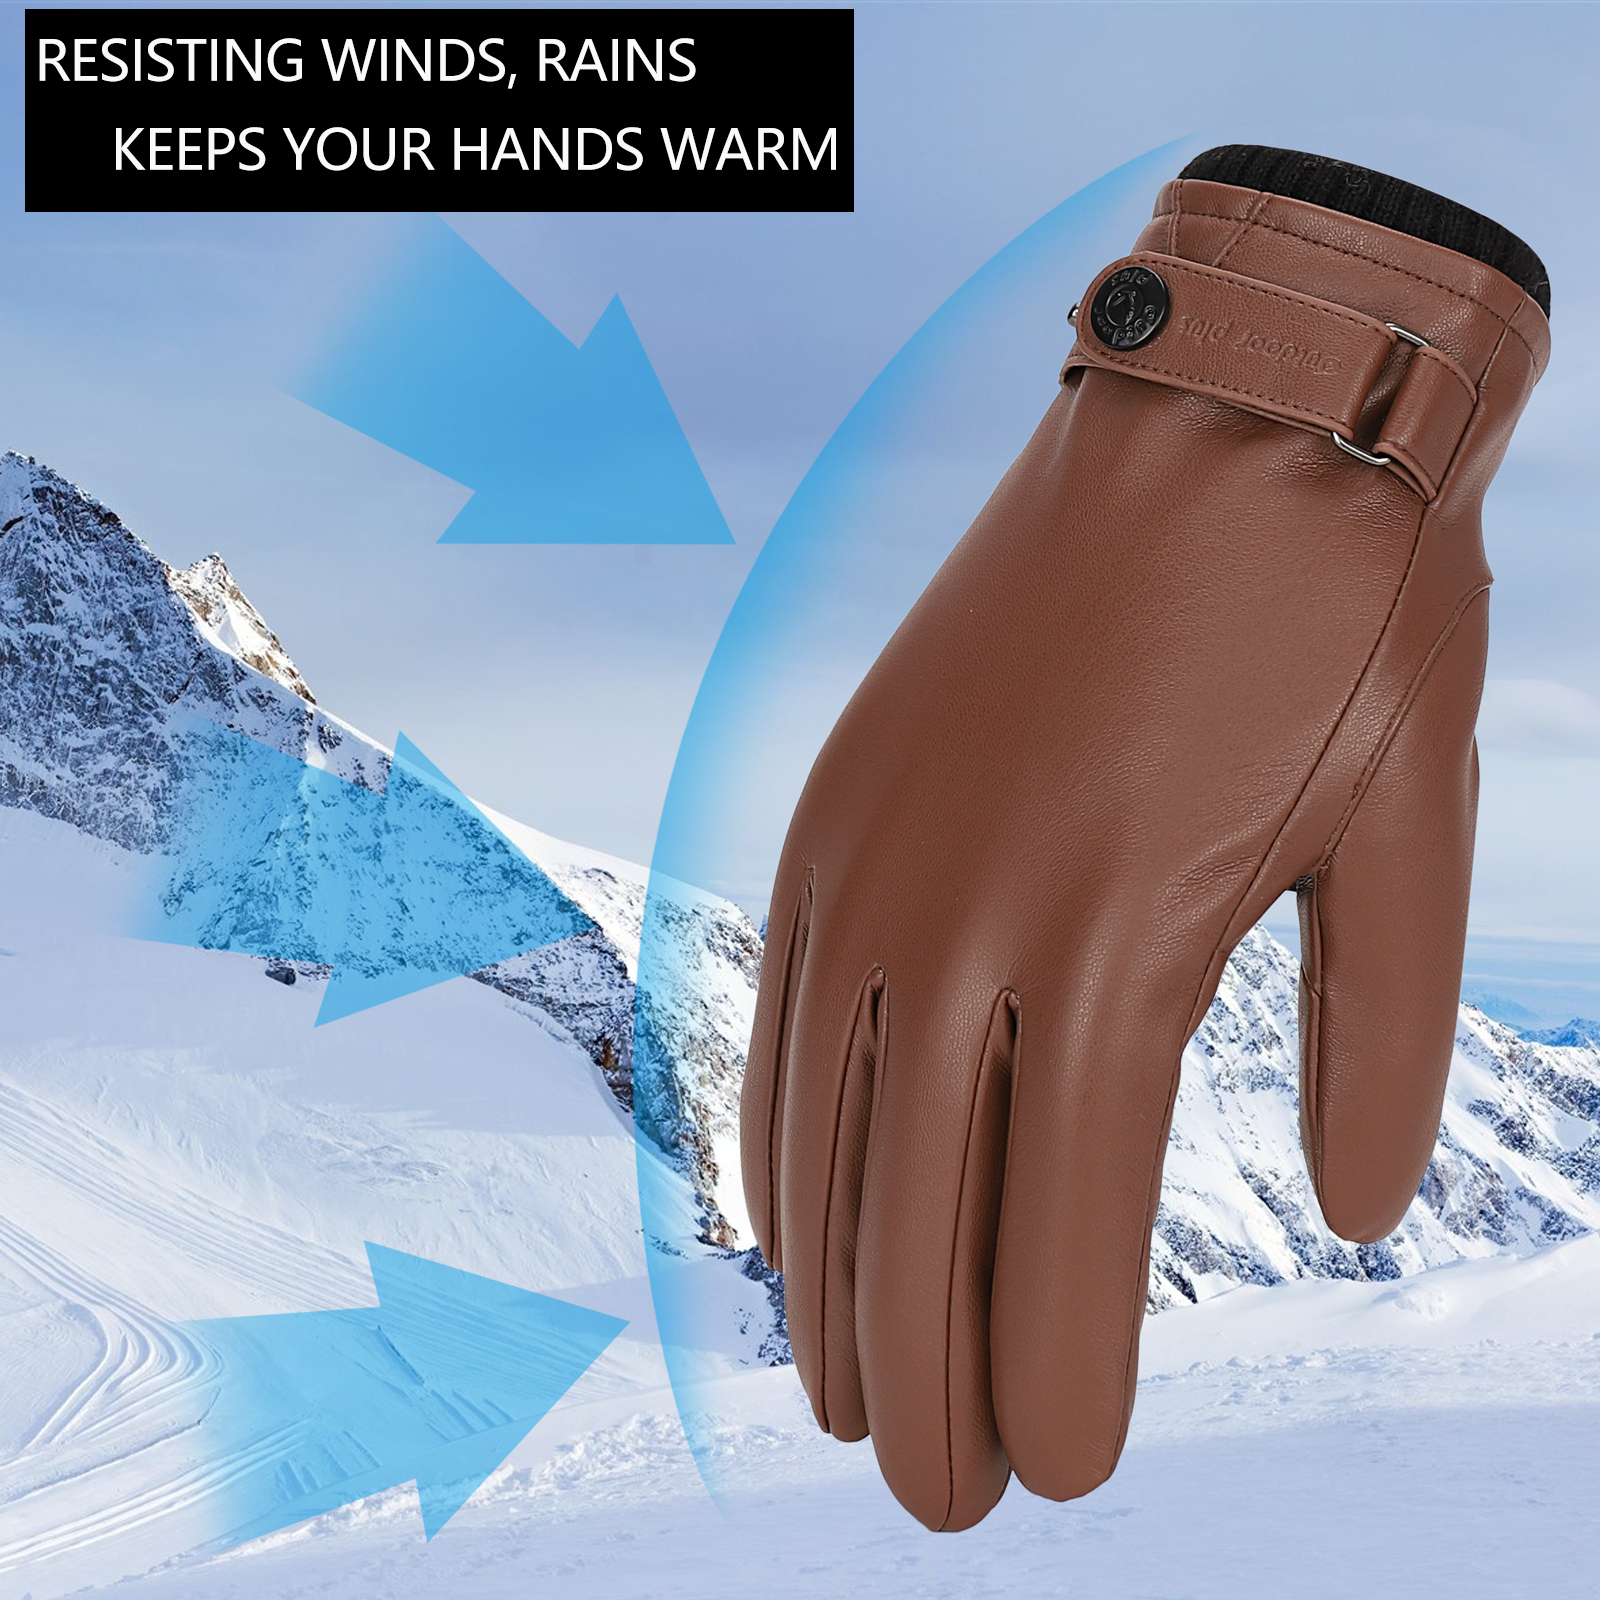 Leather Gloves for Men, Warm Wool Lined PU Leather Winter Gloves Touchscreen Texting,Driving Gloves Men Waterproof - image 4 of 5